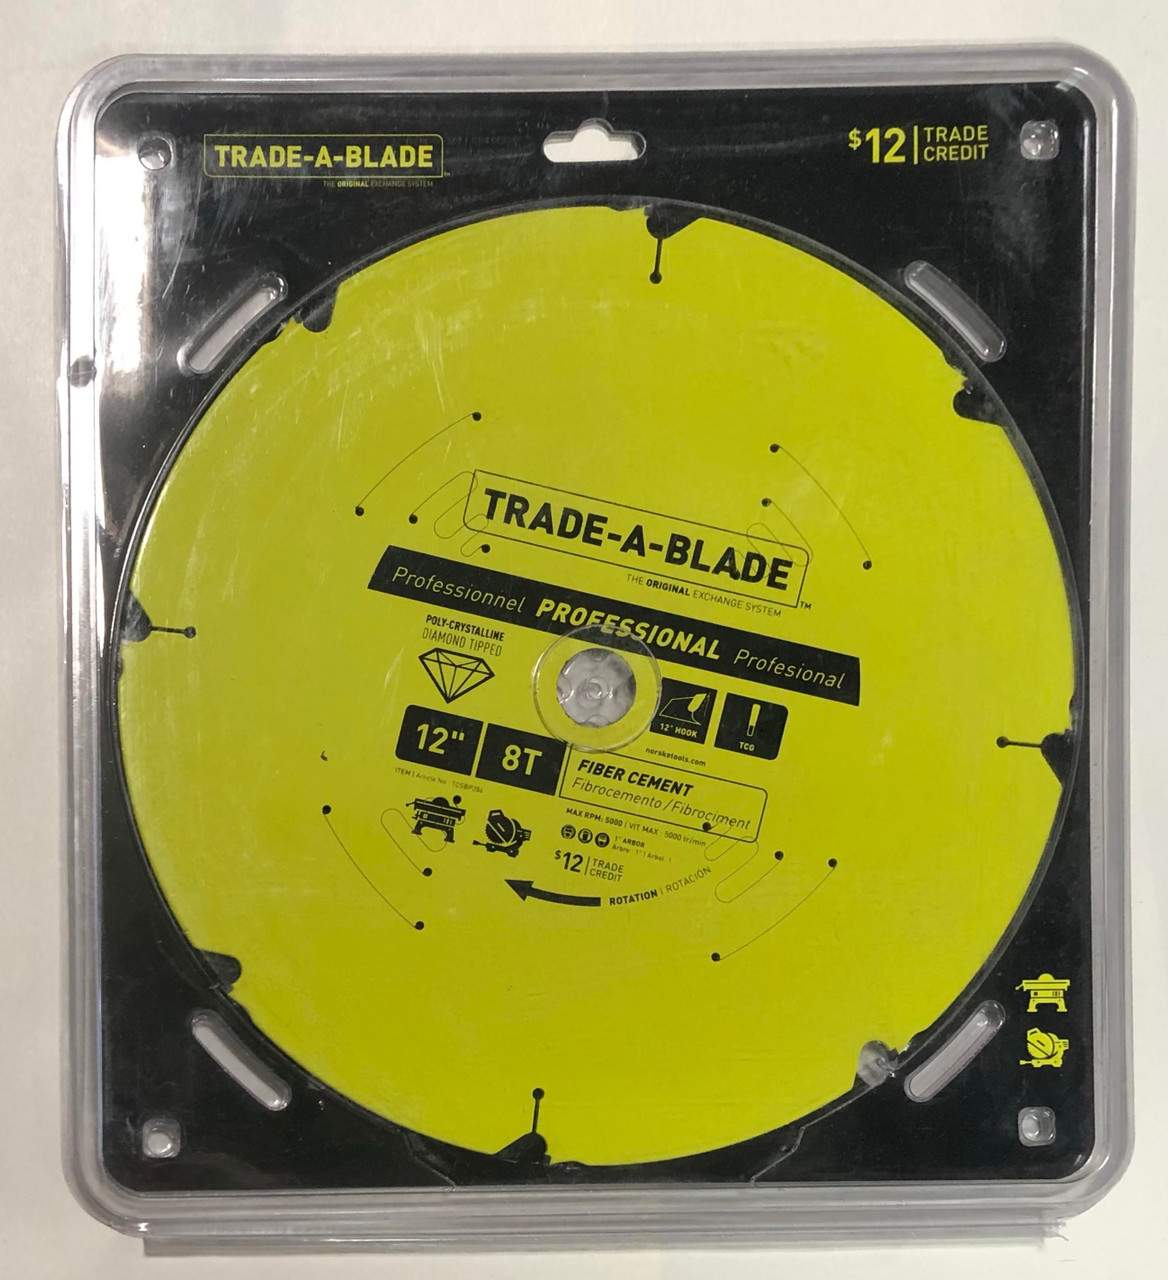 Trade-A-Blade Professional Poly-Crystalline Diamond Tipped 12" 8T Fiber Cement Circular Saw Blade